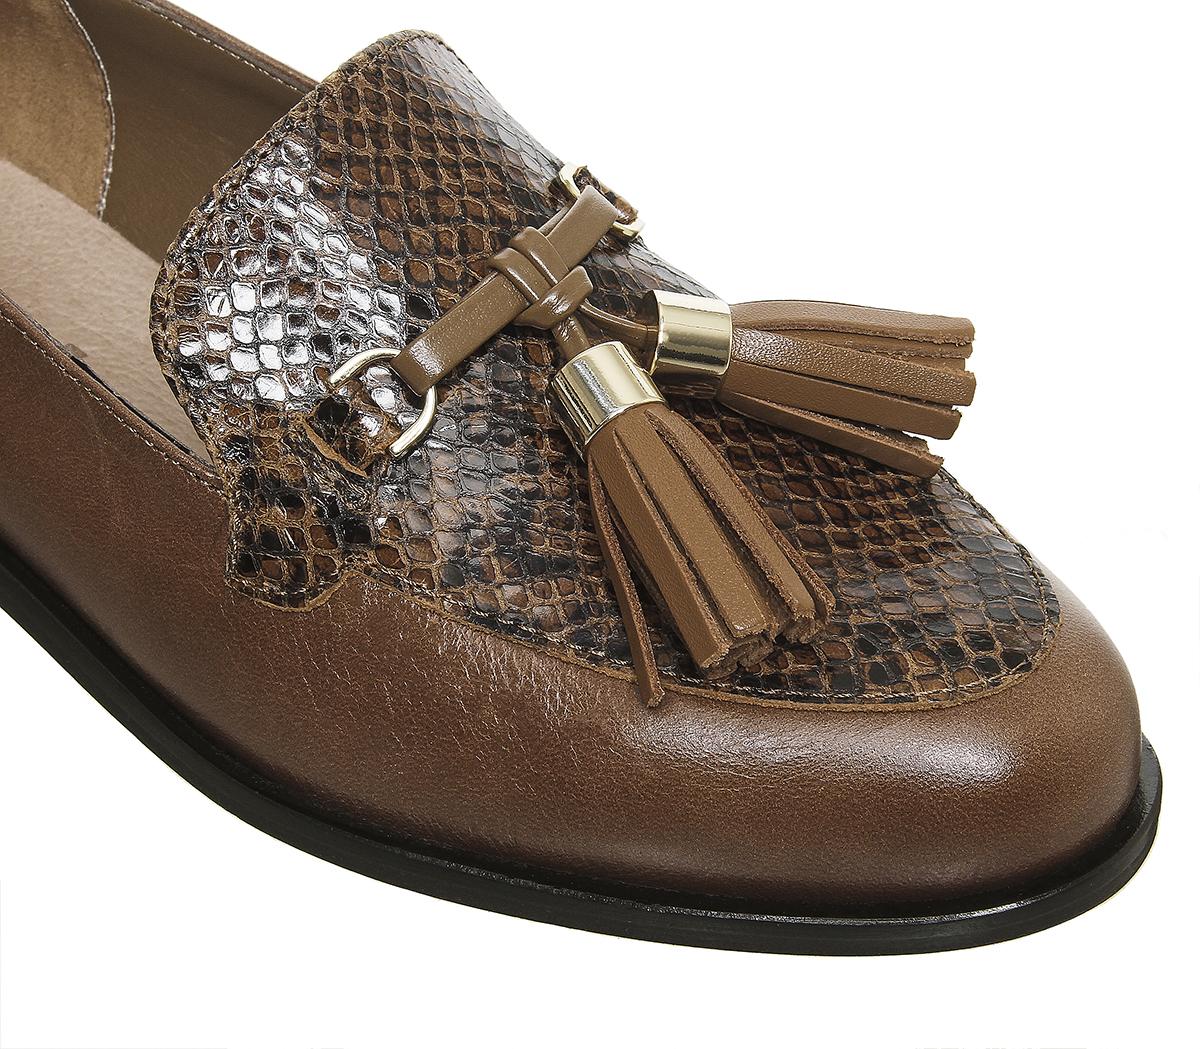 Office Function Tassel Loafers Dark Tan Leather Snake Mix - Women’s Loafers